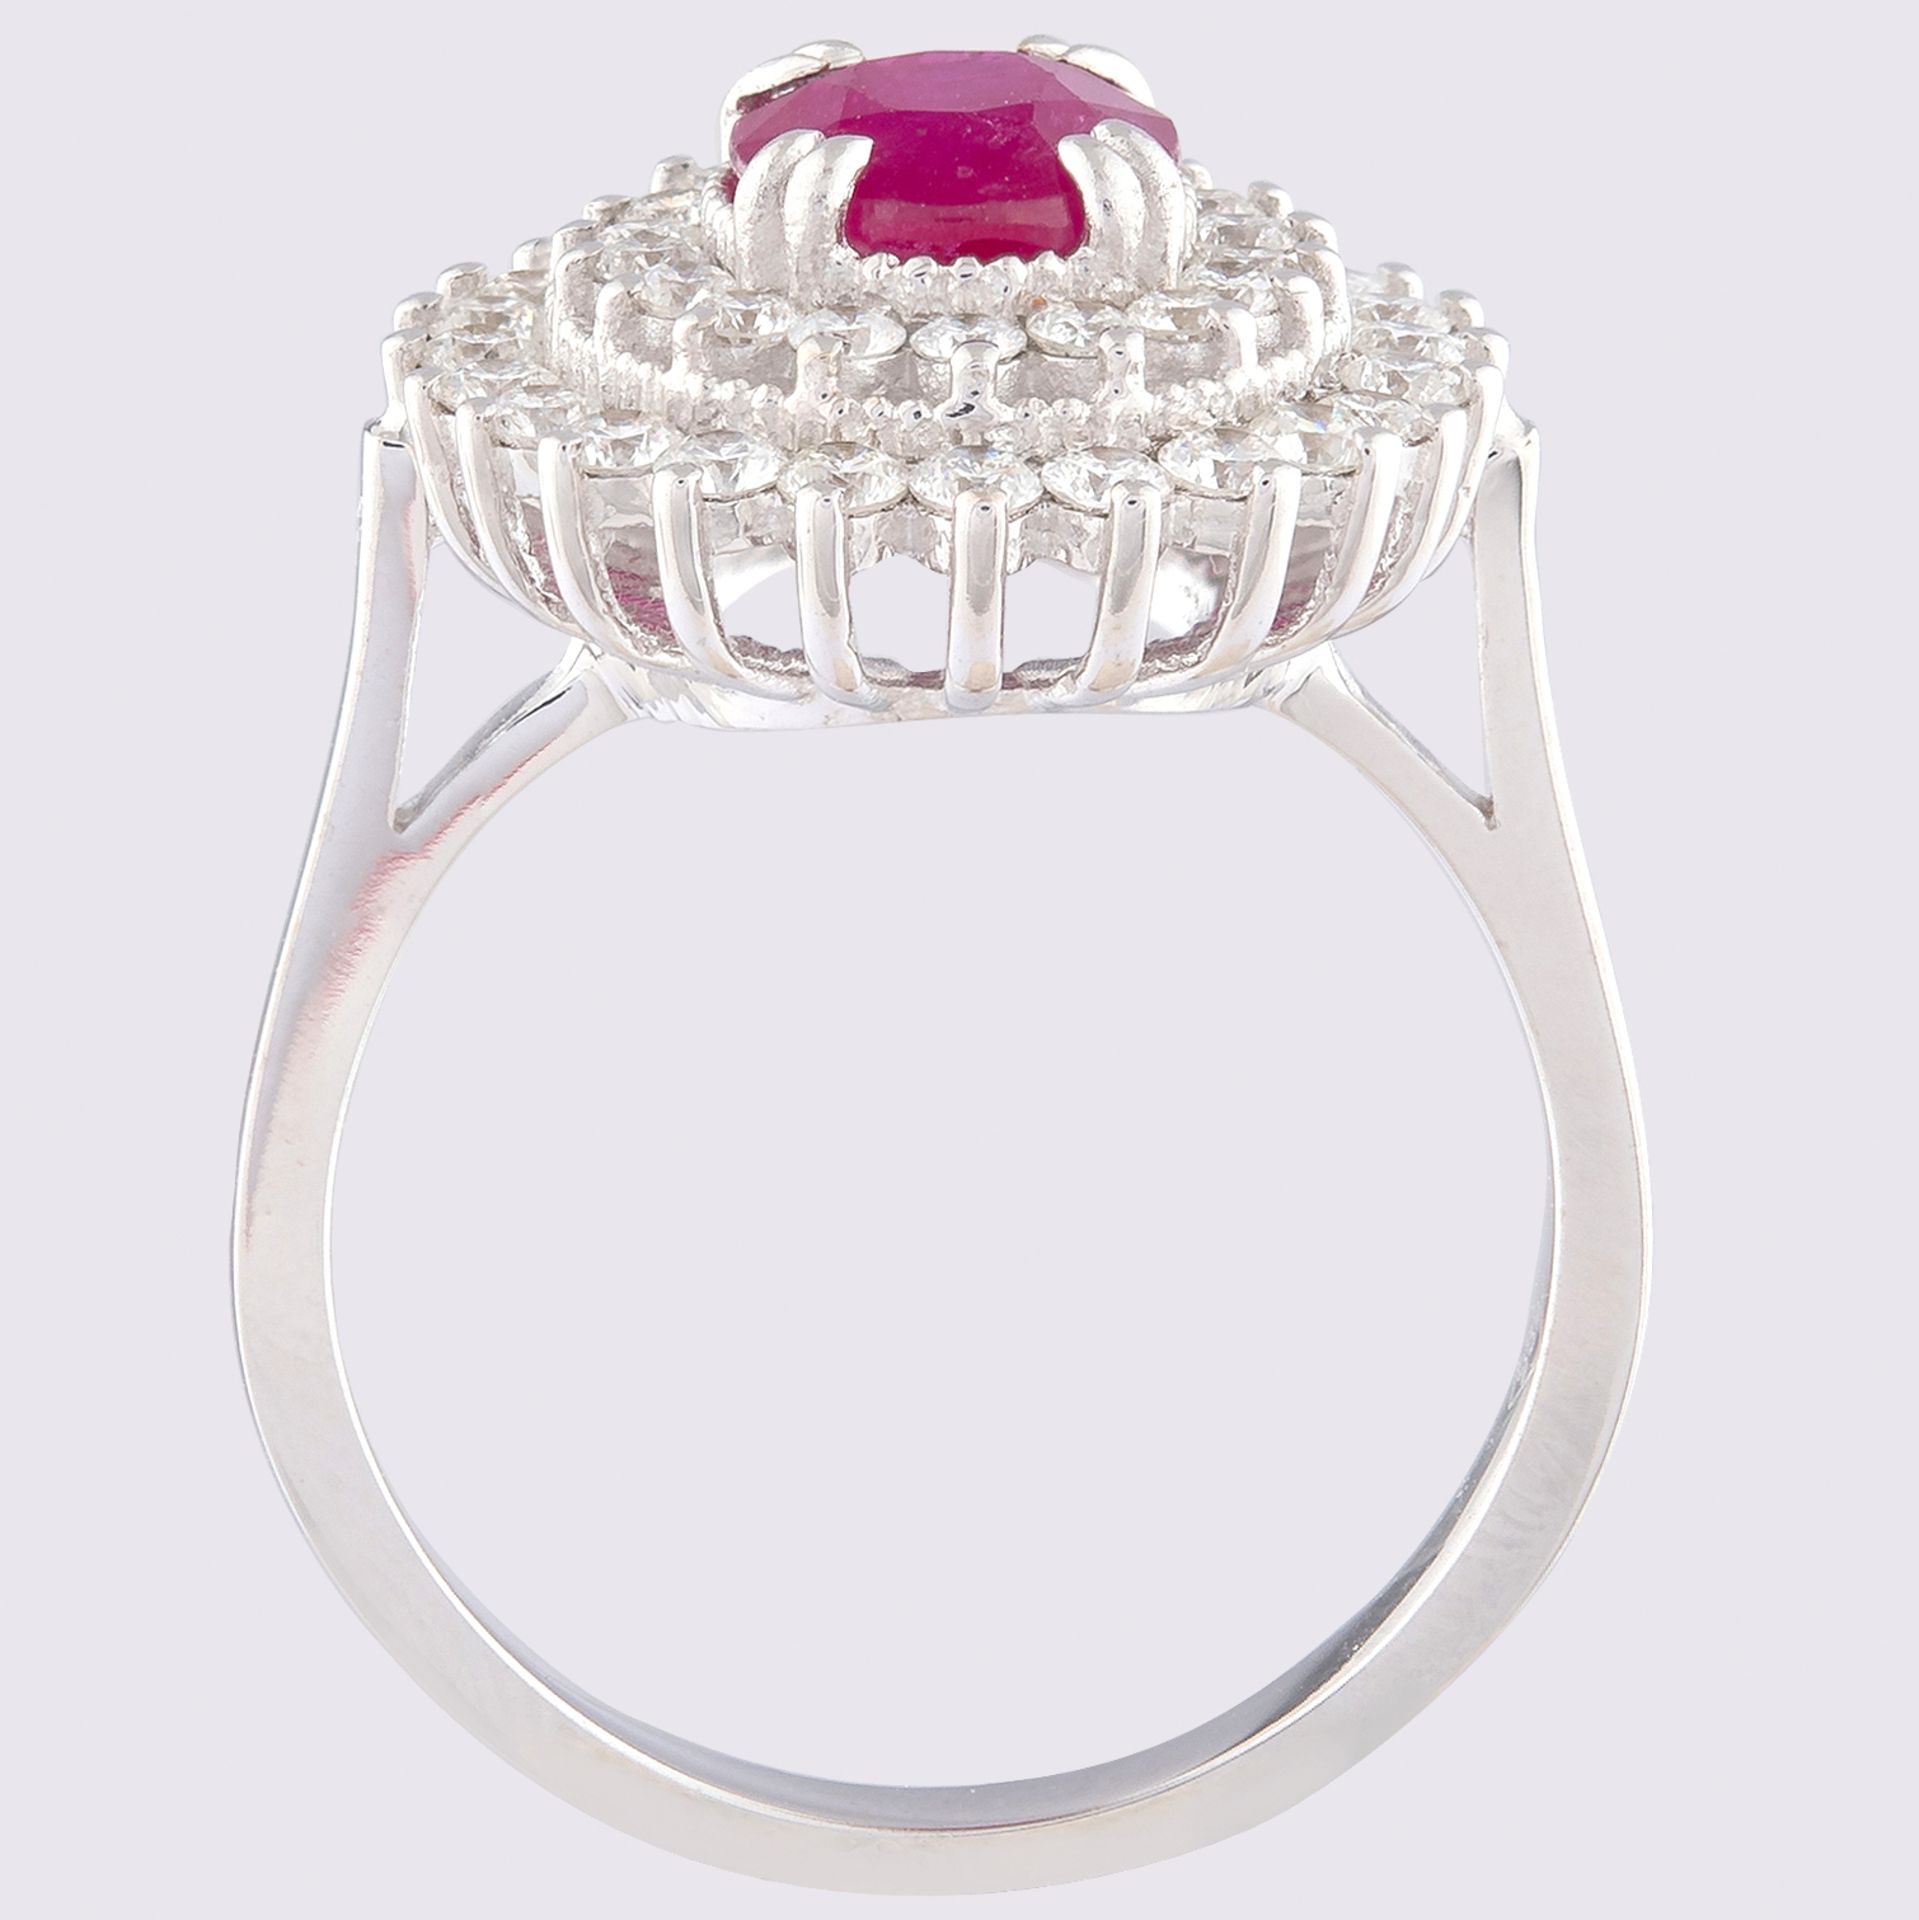 Certificated 14K White Gold Diamond & Ruby Ring - Image 2 of 4